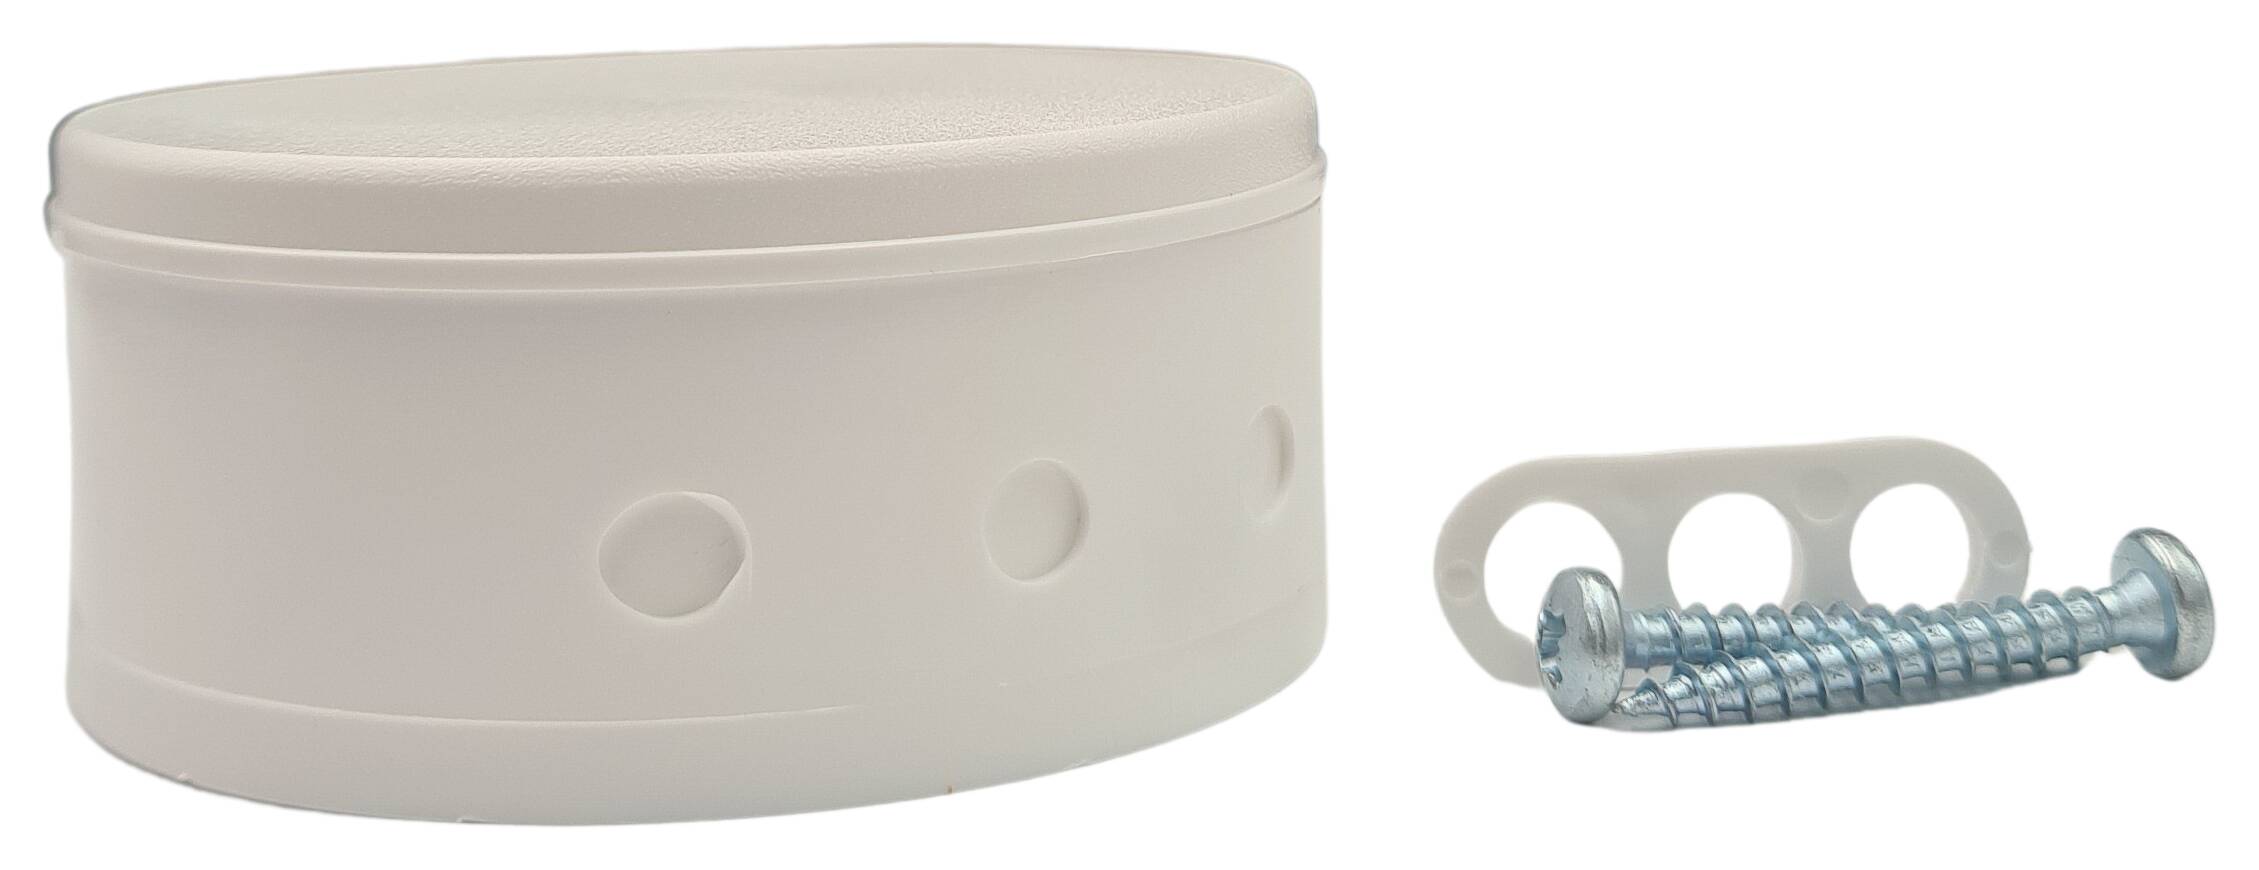 plastic distributor ceiling cap 70x31 2-part with accessory white